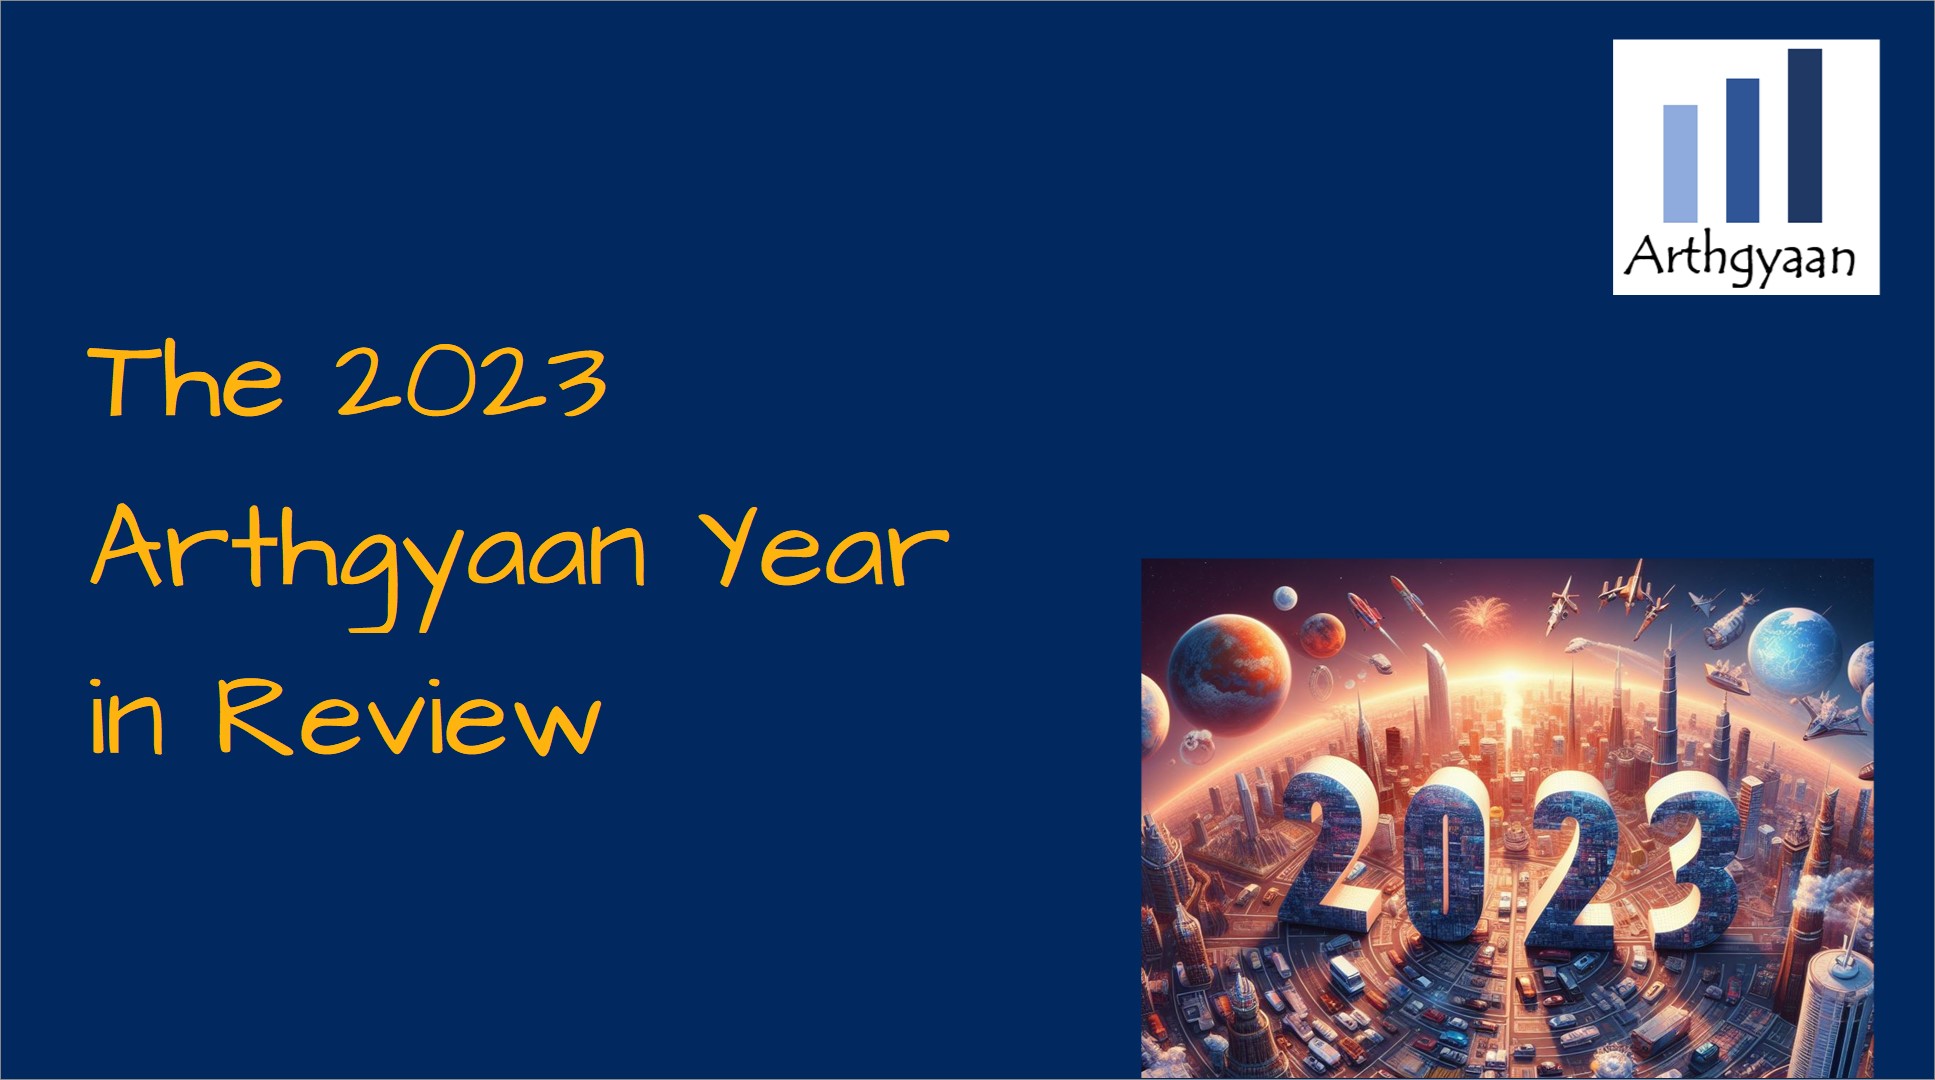 The 2023 Arthgyaan Year in Review